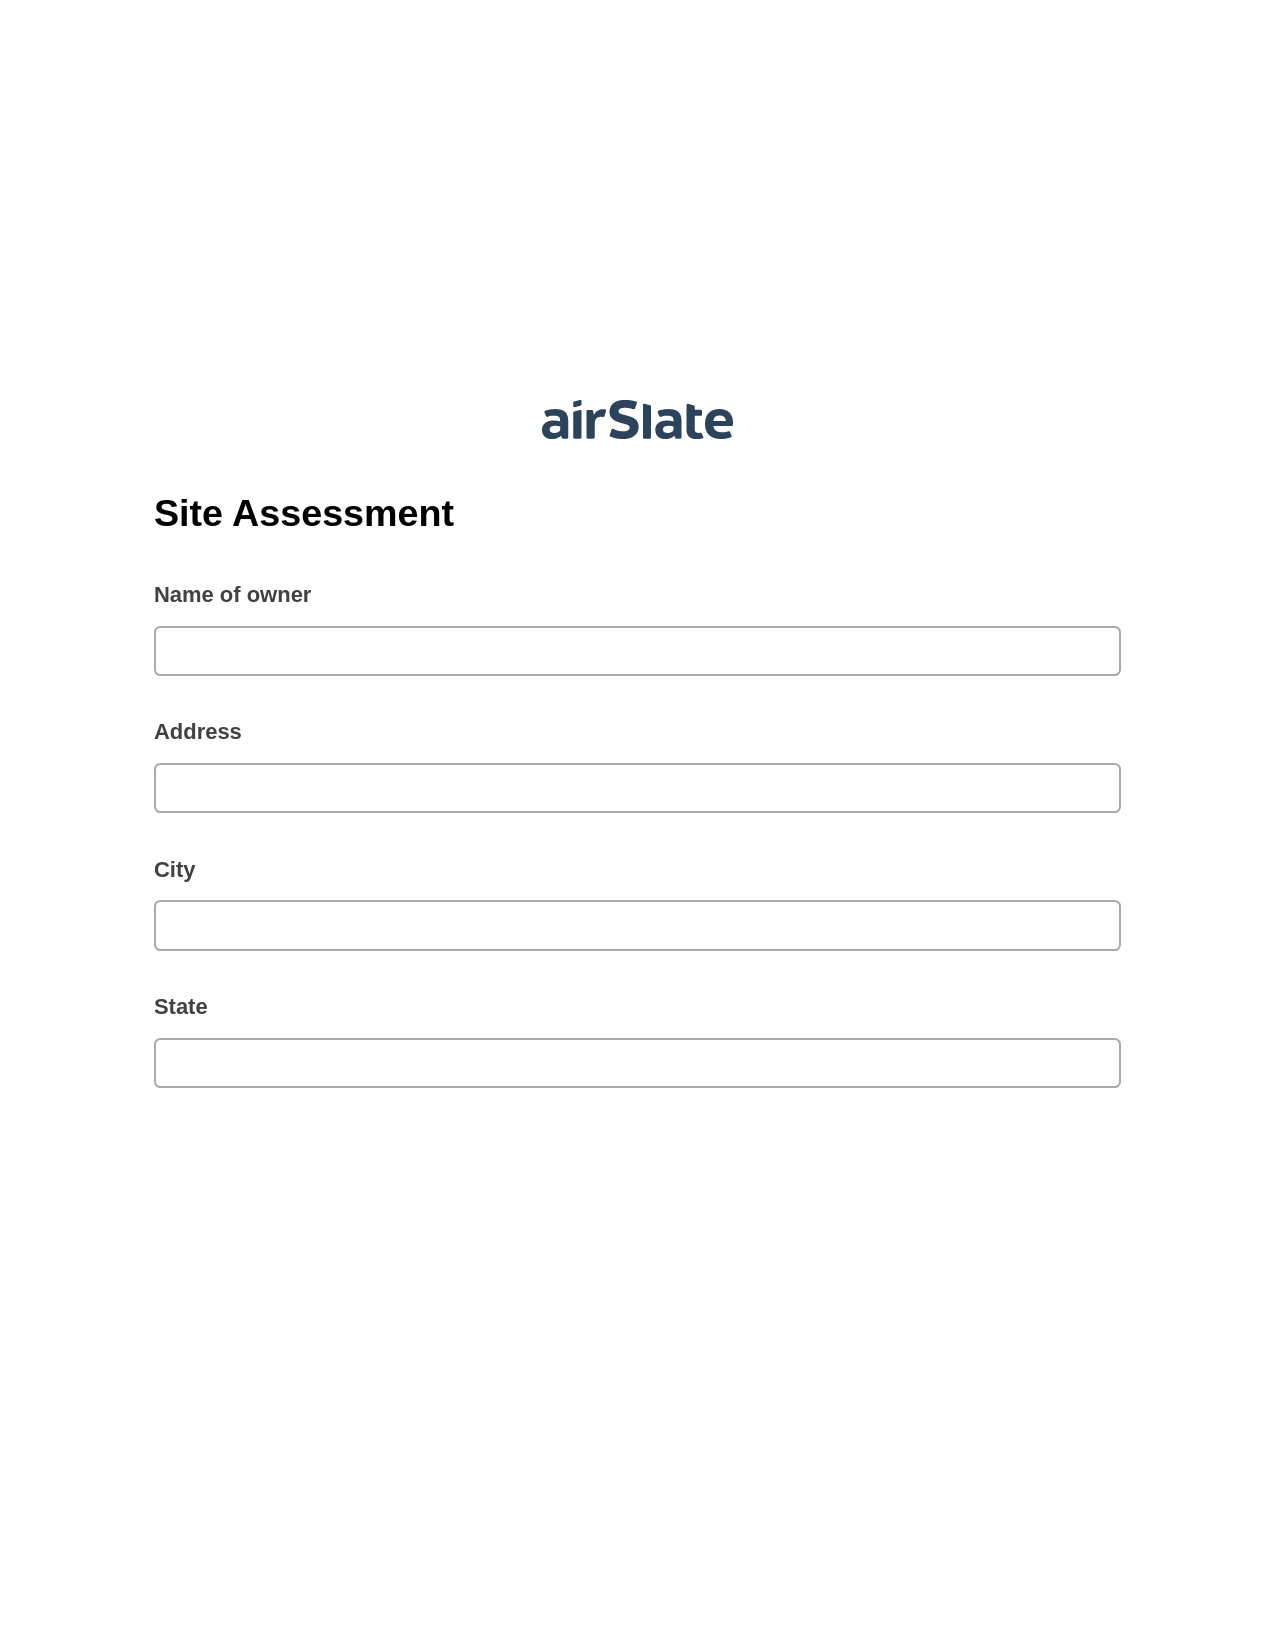 Site Assessment Pre-fill from another Slate Bot, Assign Slate Name Bot, Post-finish Document Bot